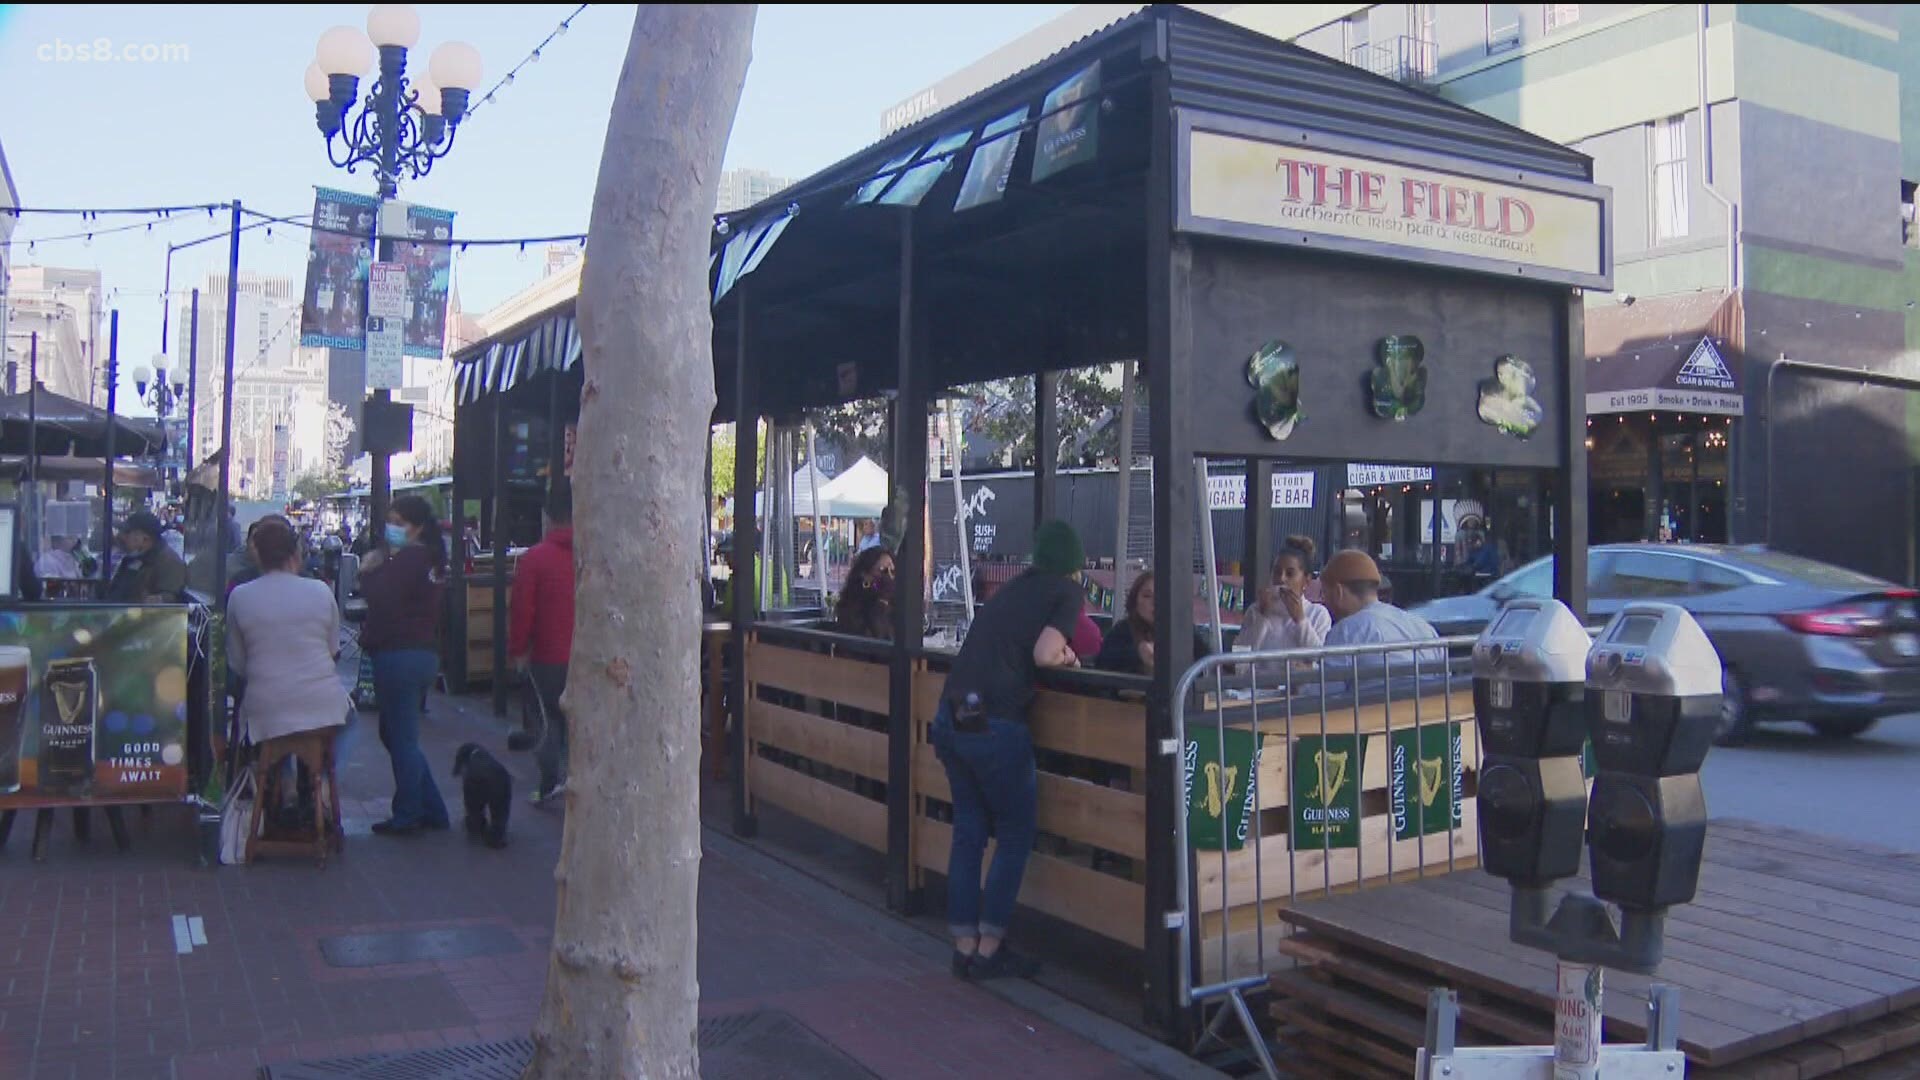 St. Patrick's Day won't be filled with normal celebrations but the Gaslamp is preparing for crowds for the Irish holiday.